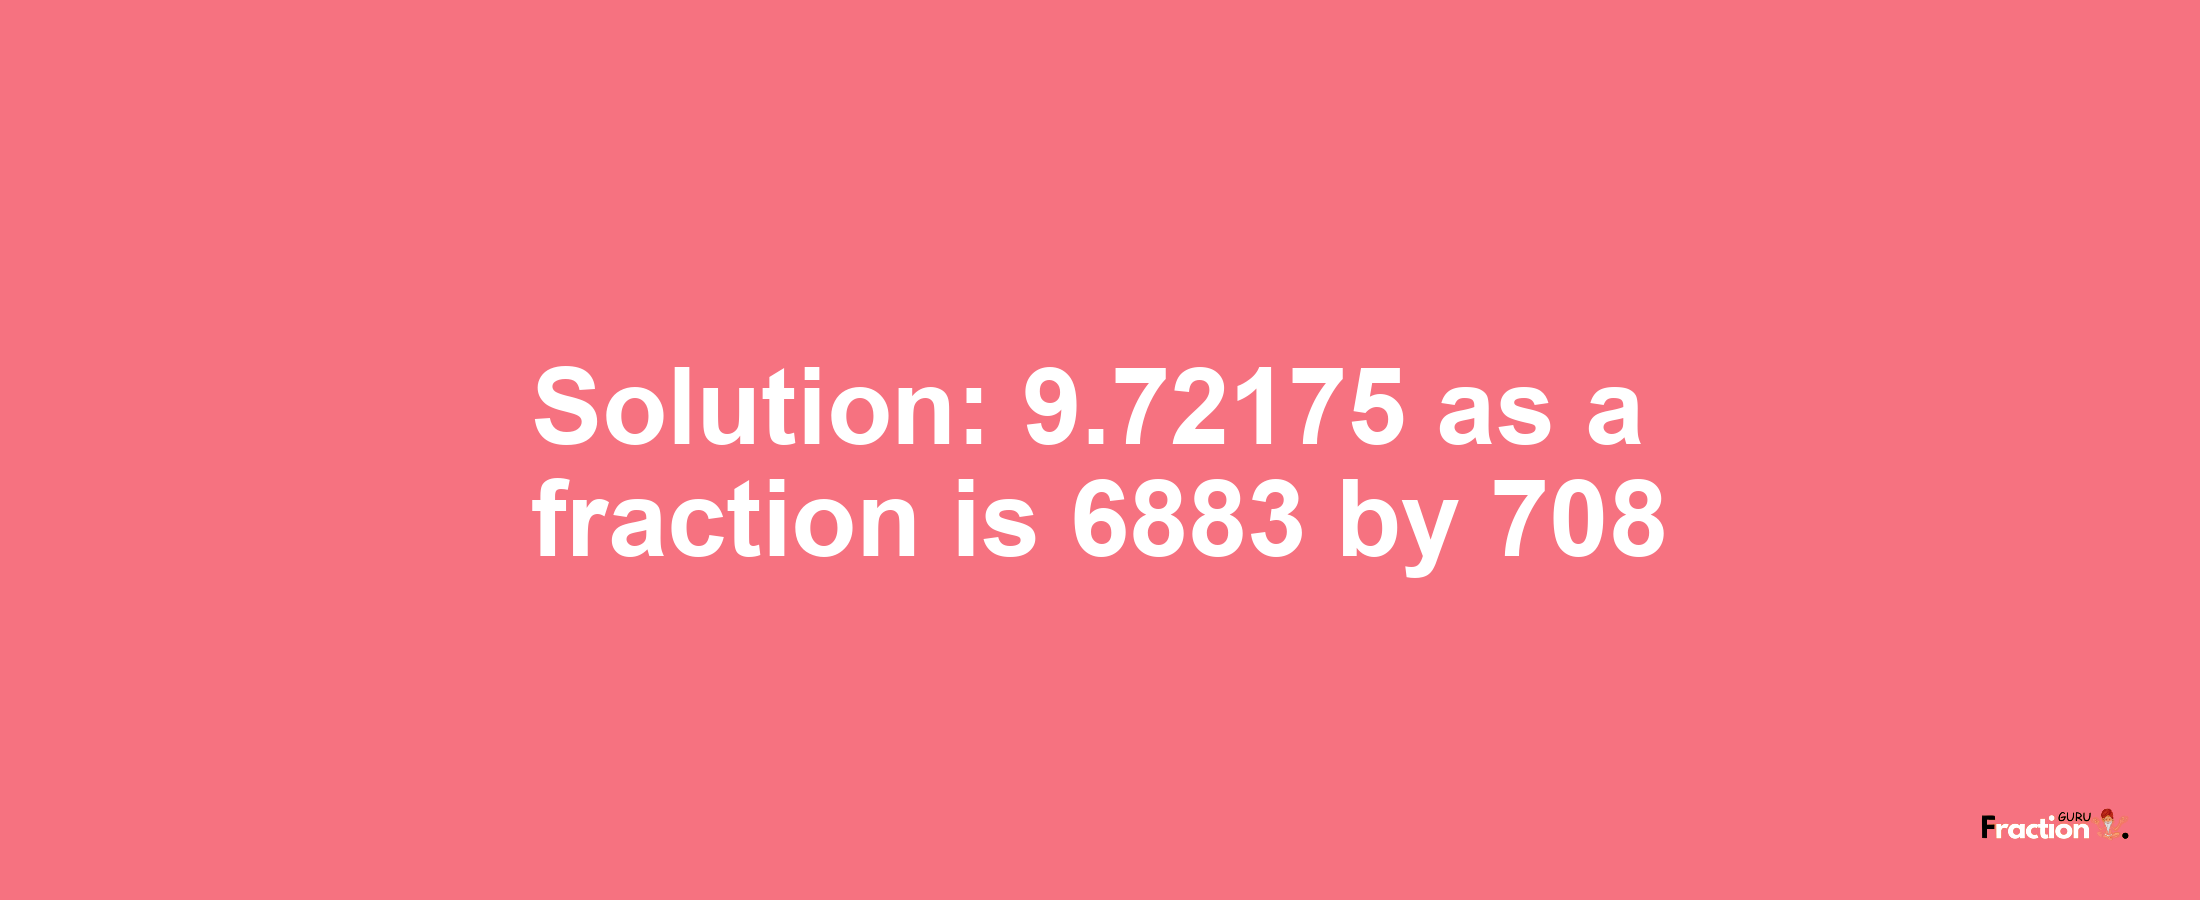 Solution:9.72175 as a fraction is 6883/708